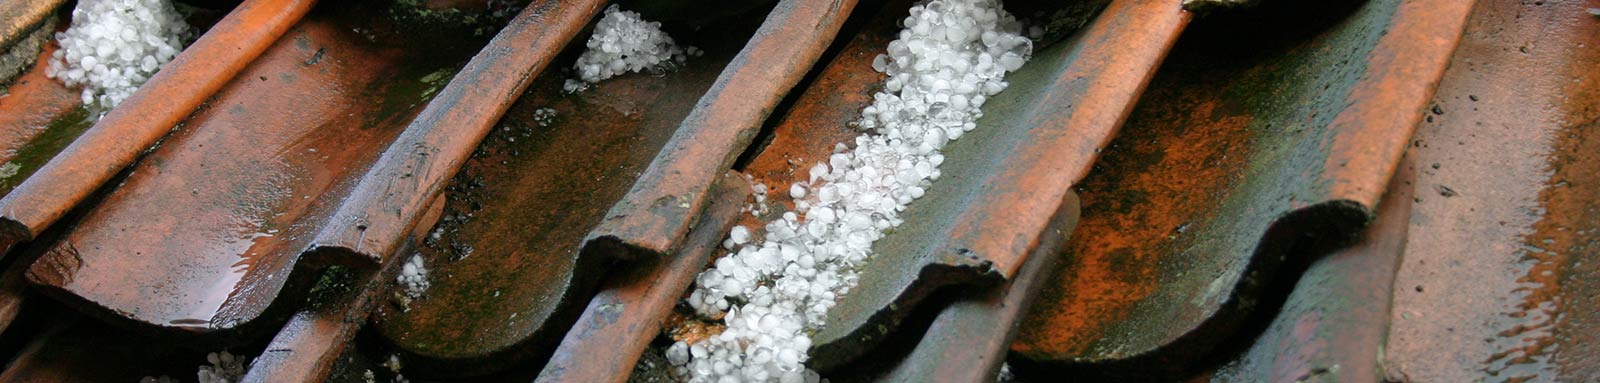 Hail on Roof